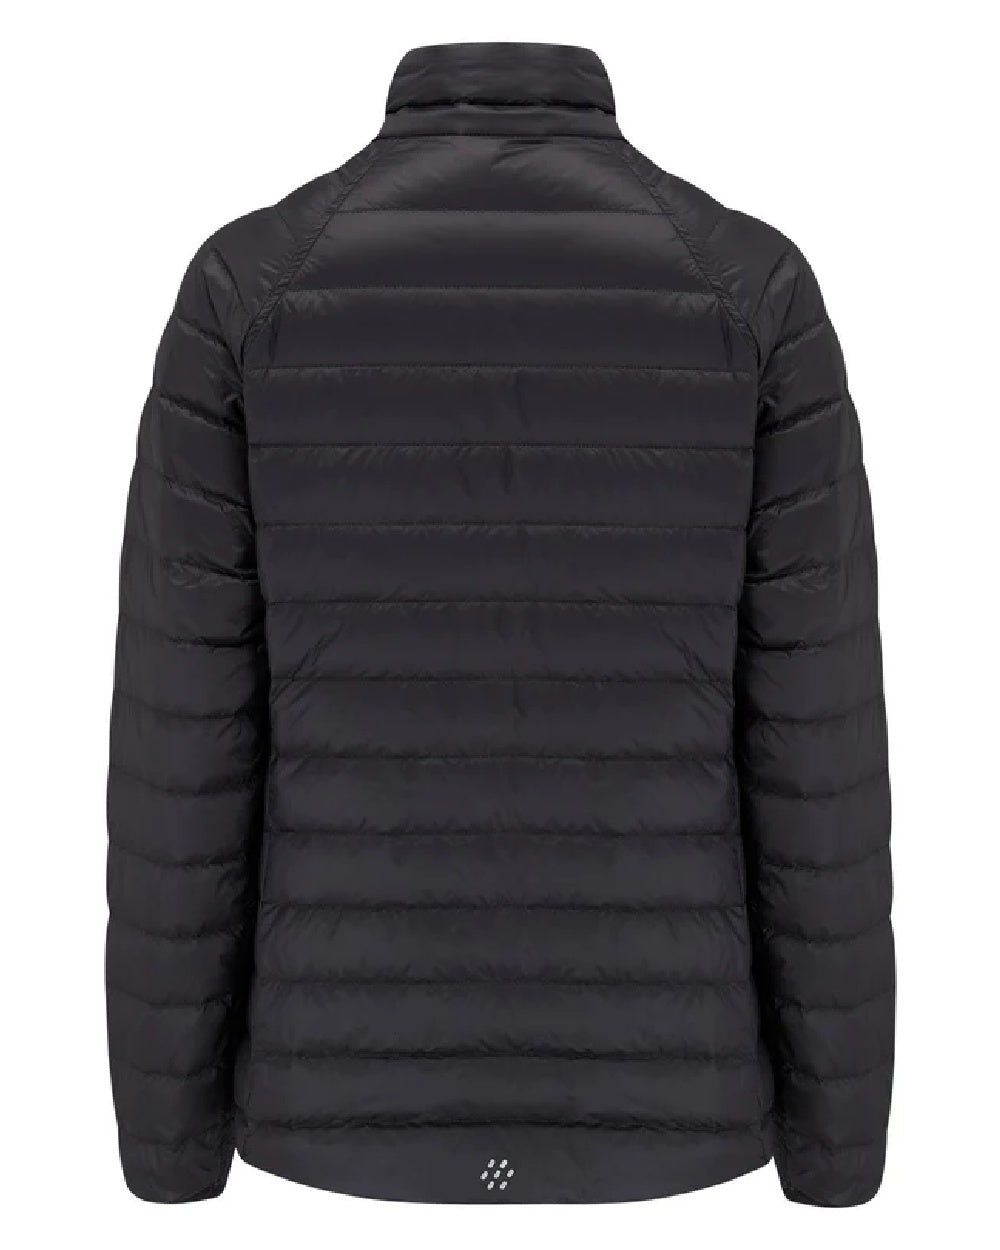 Black Grey coloured Mac In A Sac Packable Womens Down Jacket on white background 